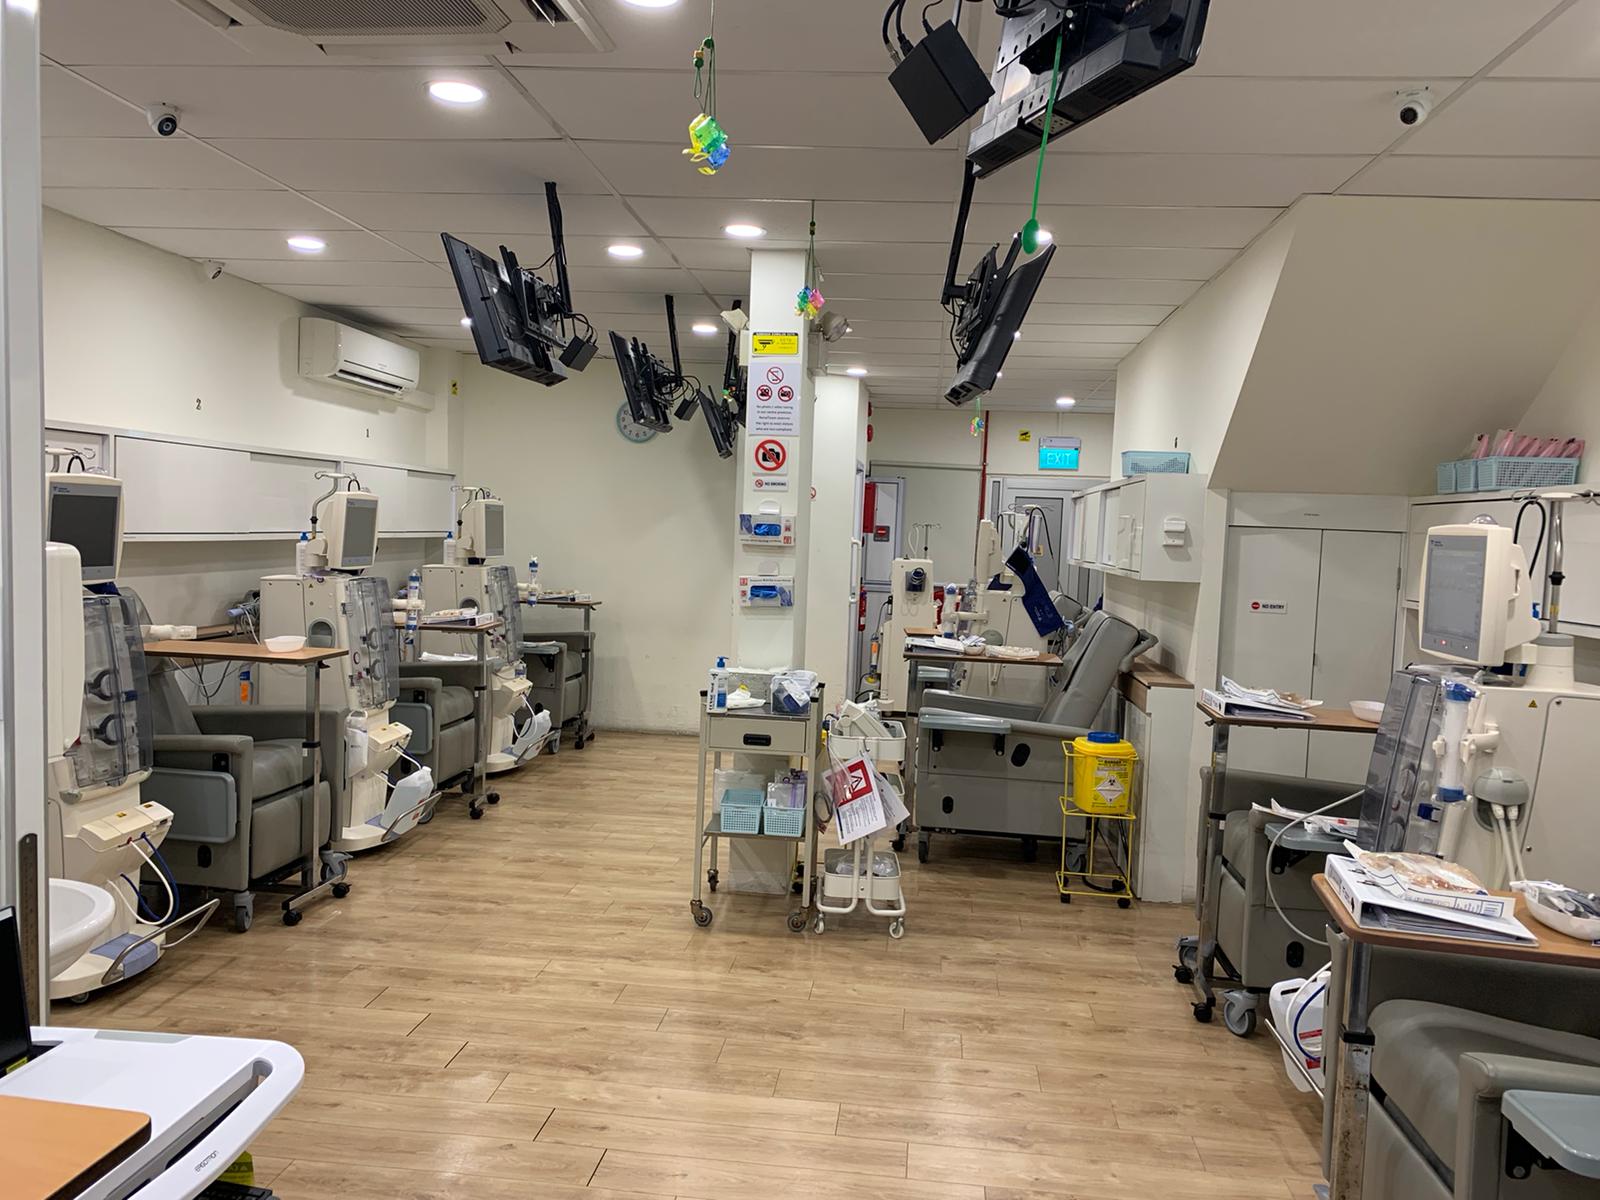 Fresenius Kidney Care Fengshan Dialysis Clinic